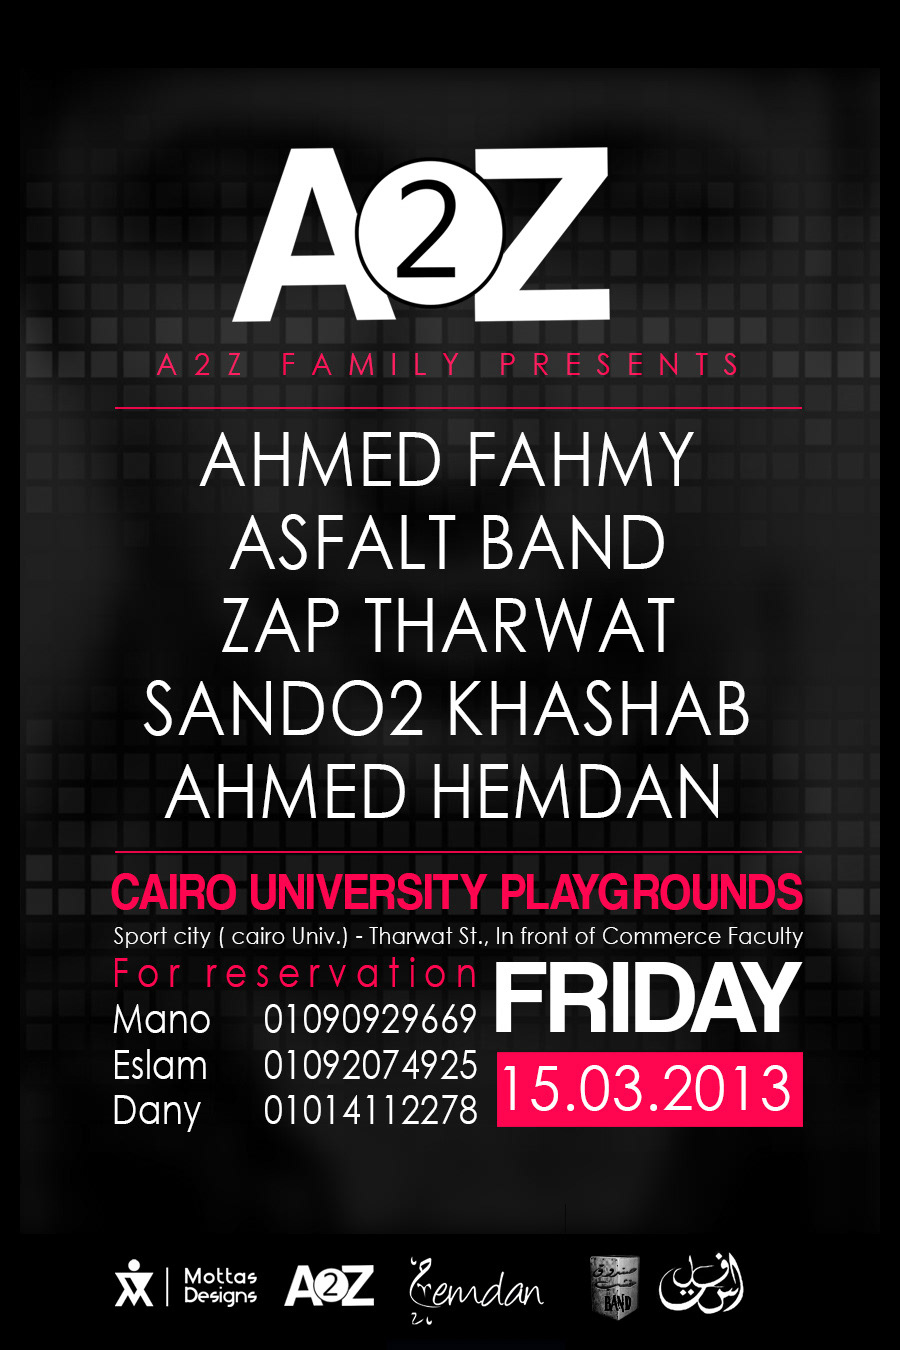 ahmed Ahmed Fahmi concer Event flyer black purple pink White Singing party